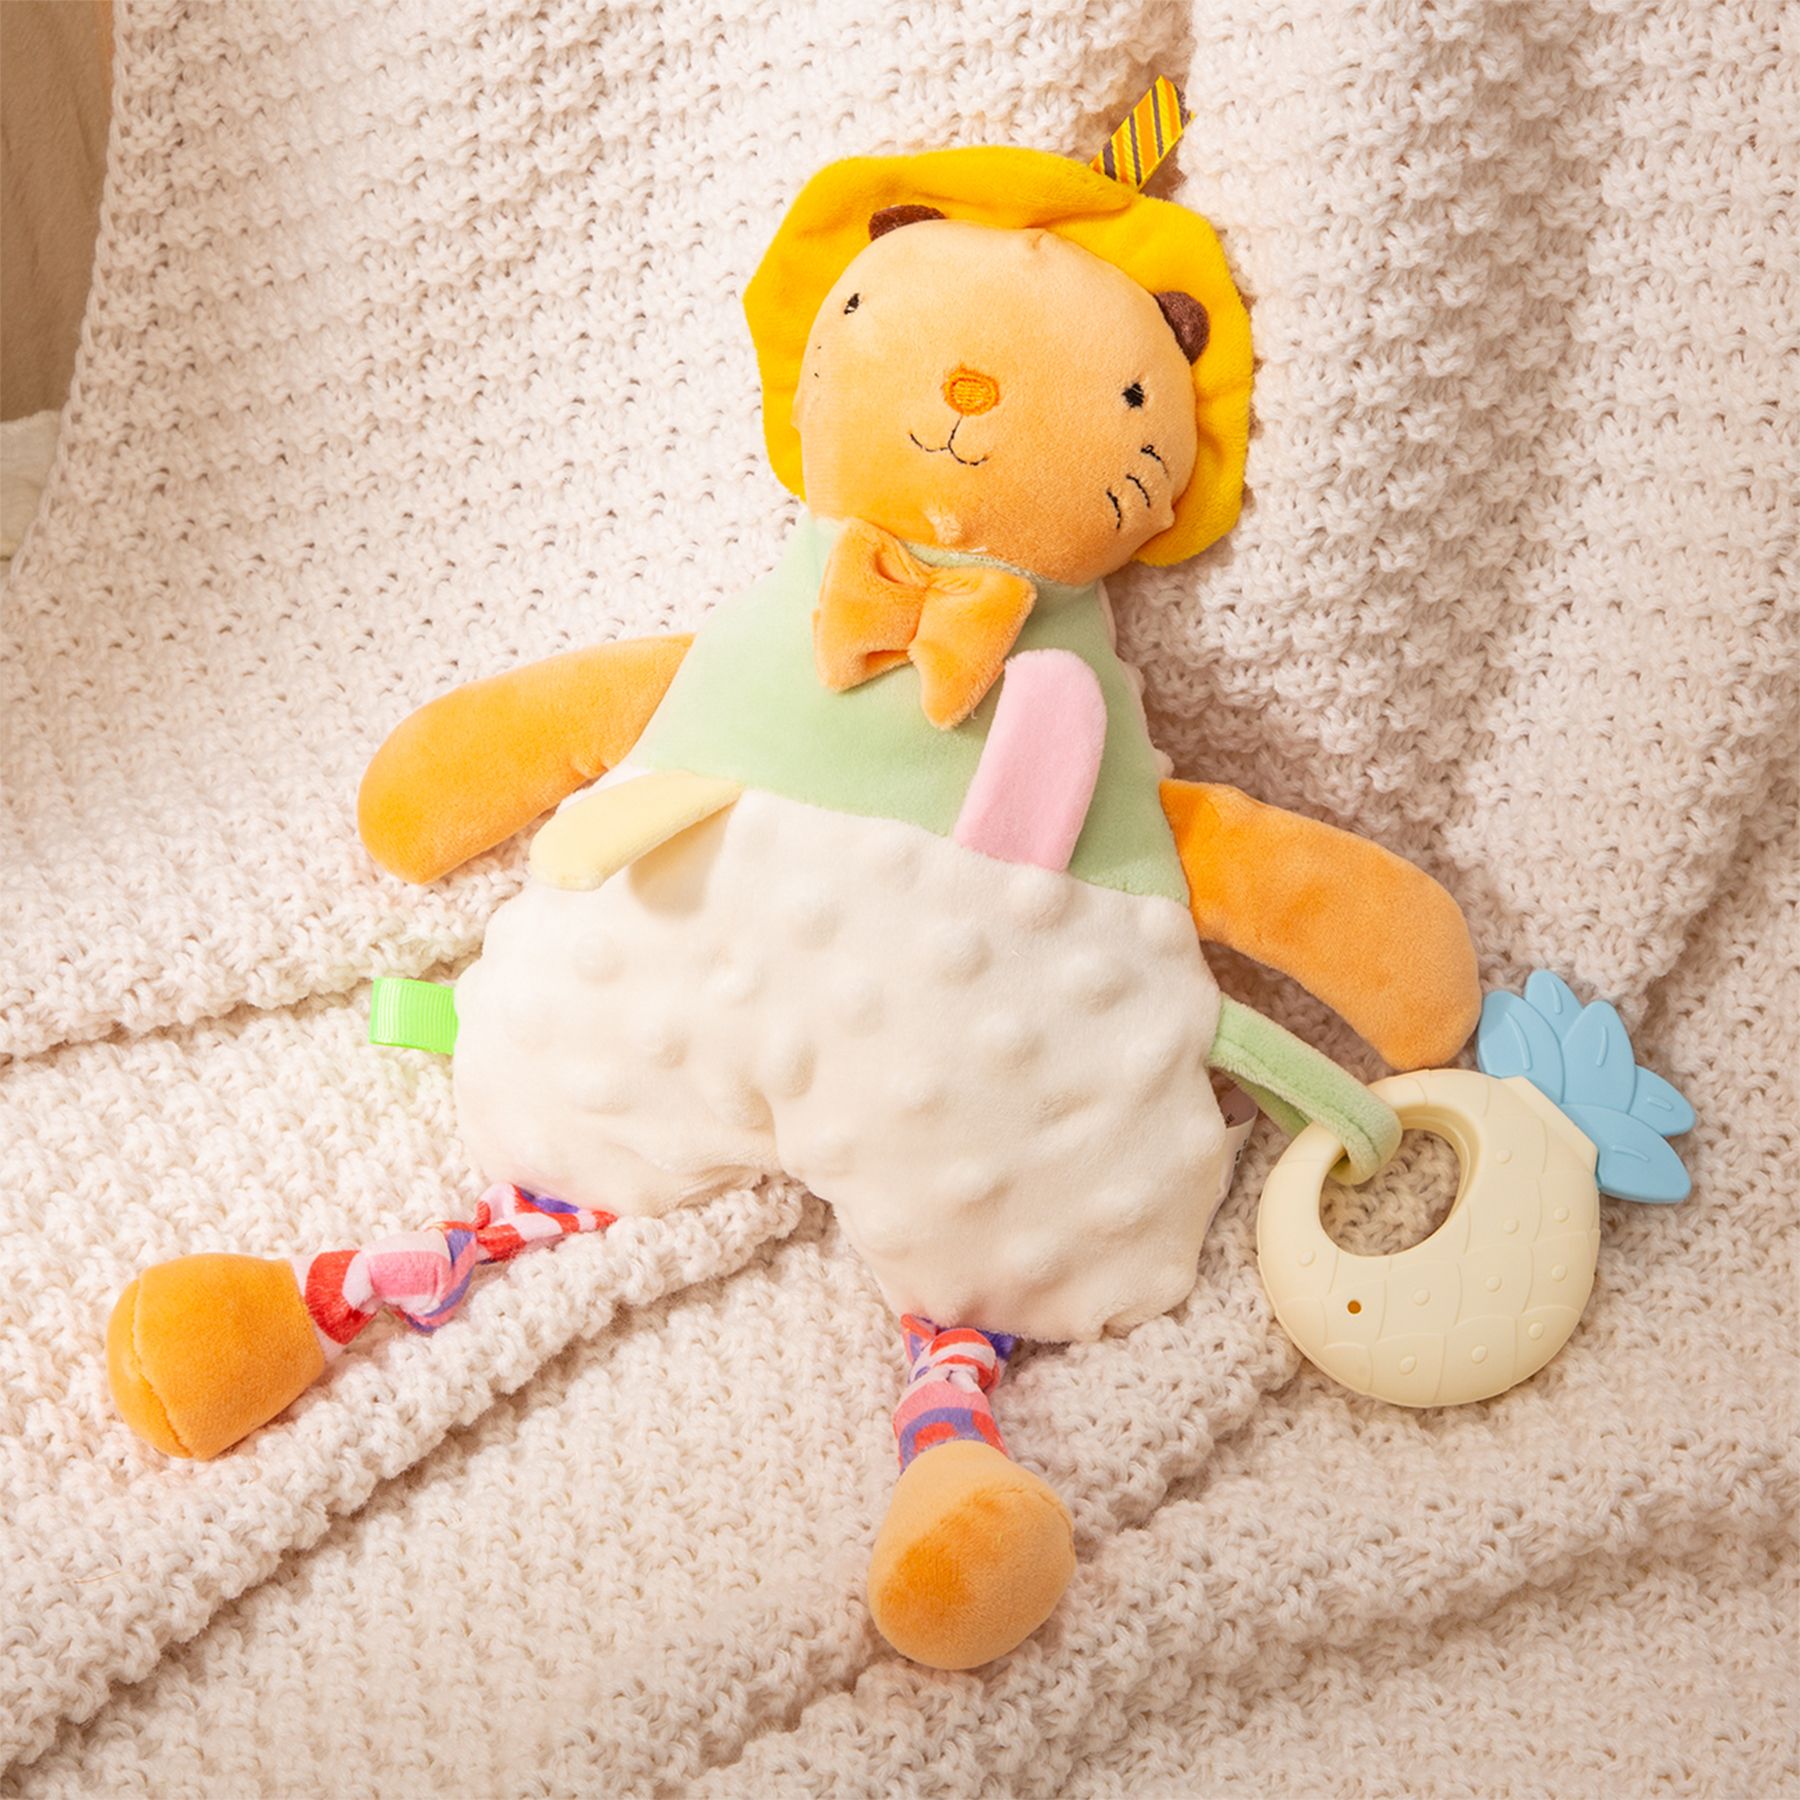 Baby Soothing And Sleep Doll - Lion, Elephant, And Cow Characters